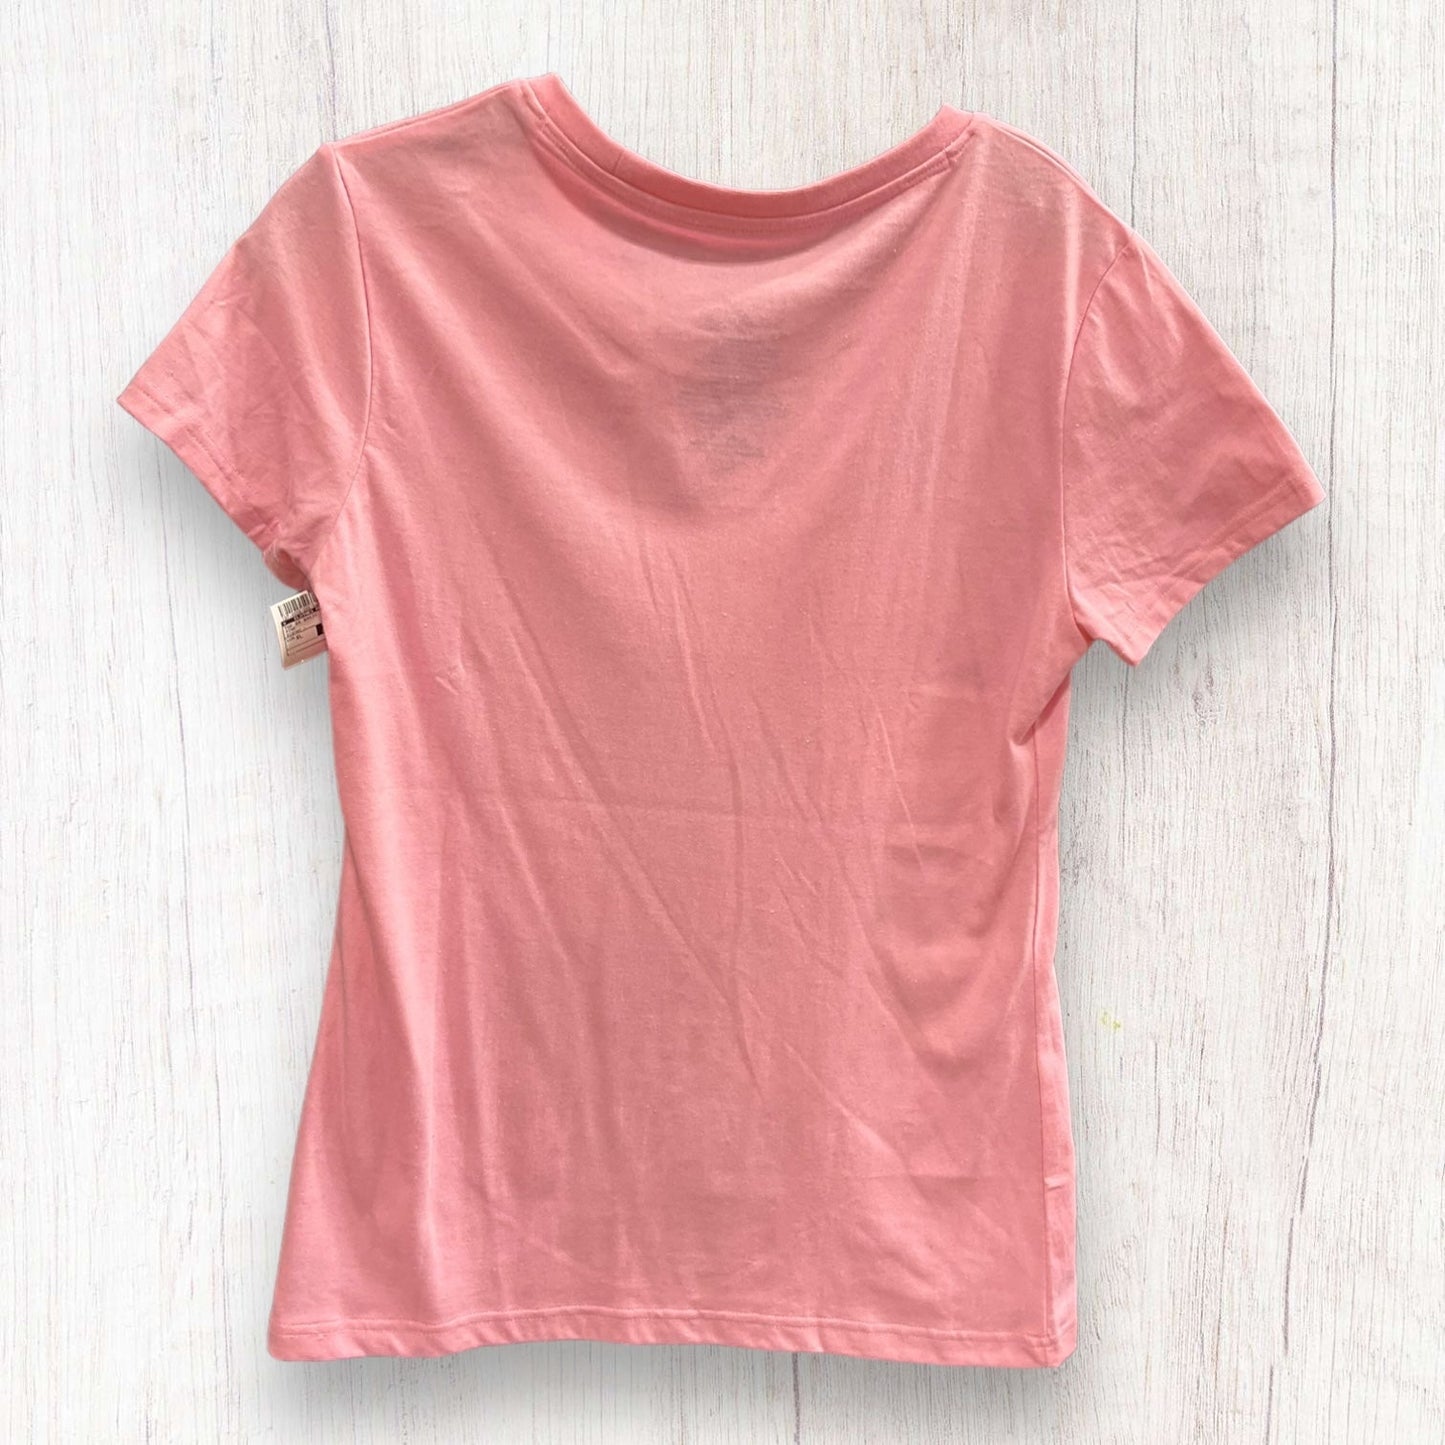 Pink Top Short Sleeve Basic Clothes Mentor, Size Xl